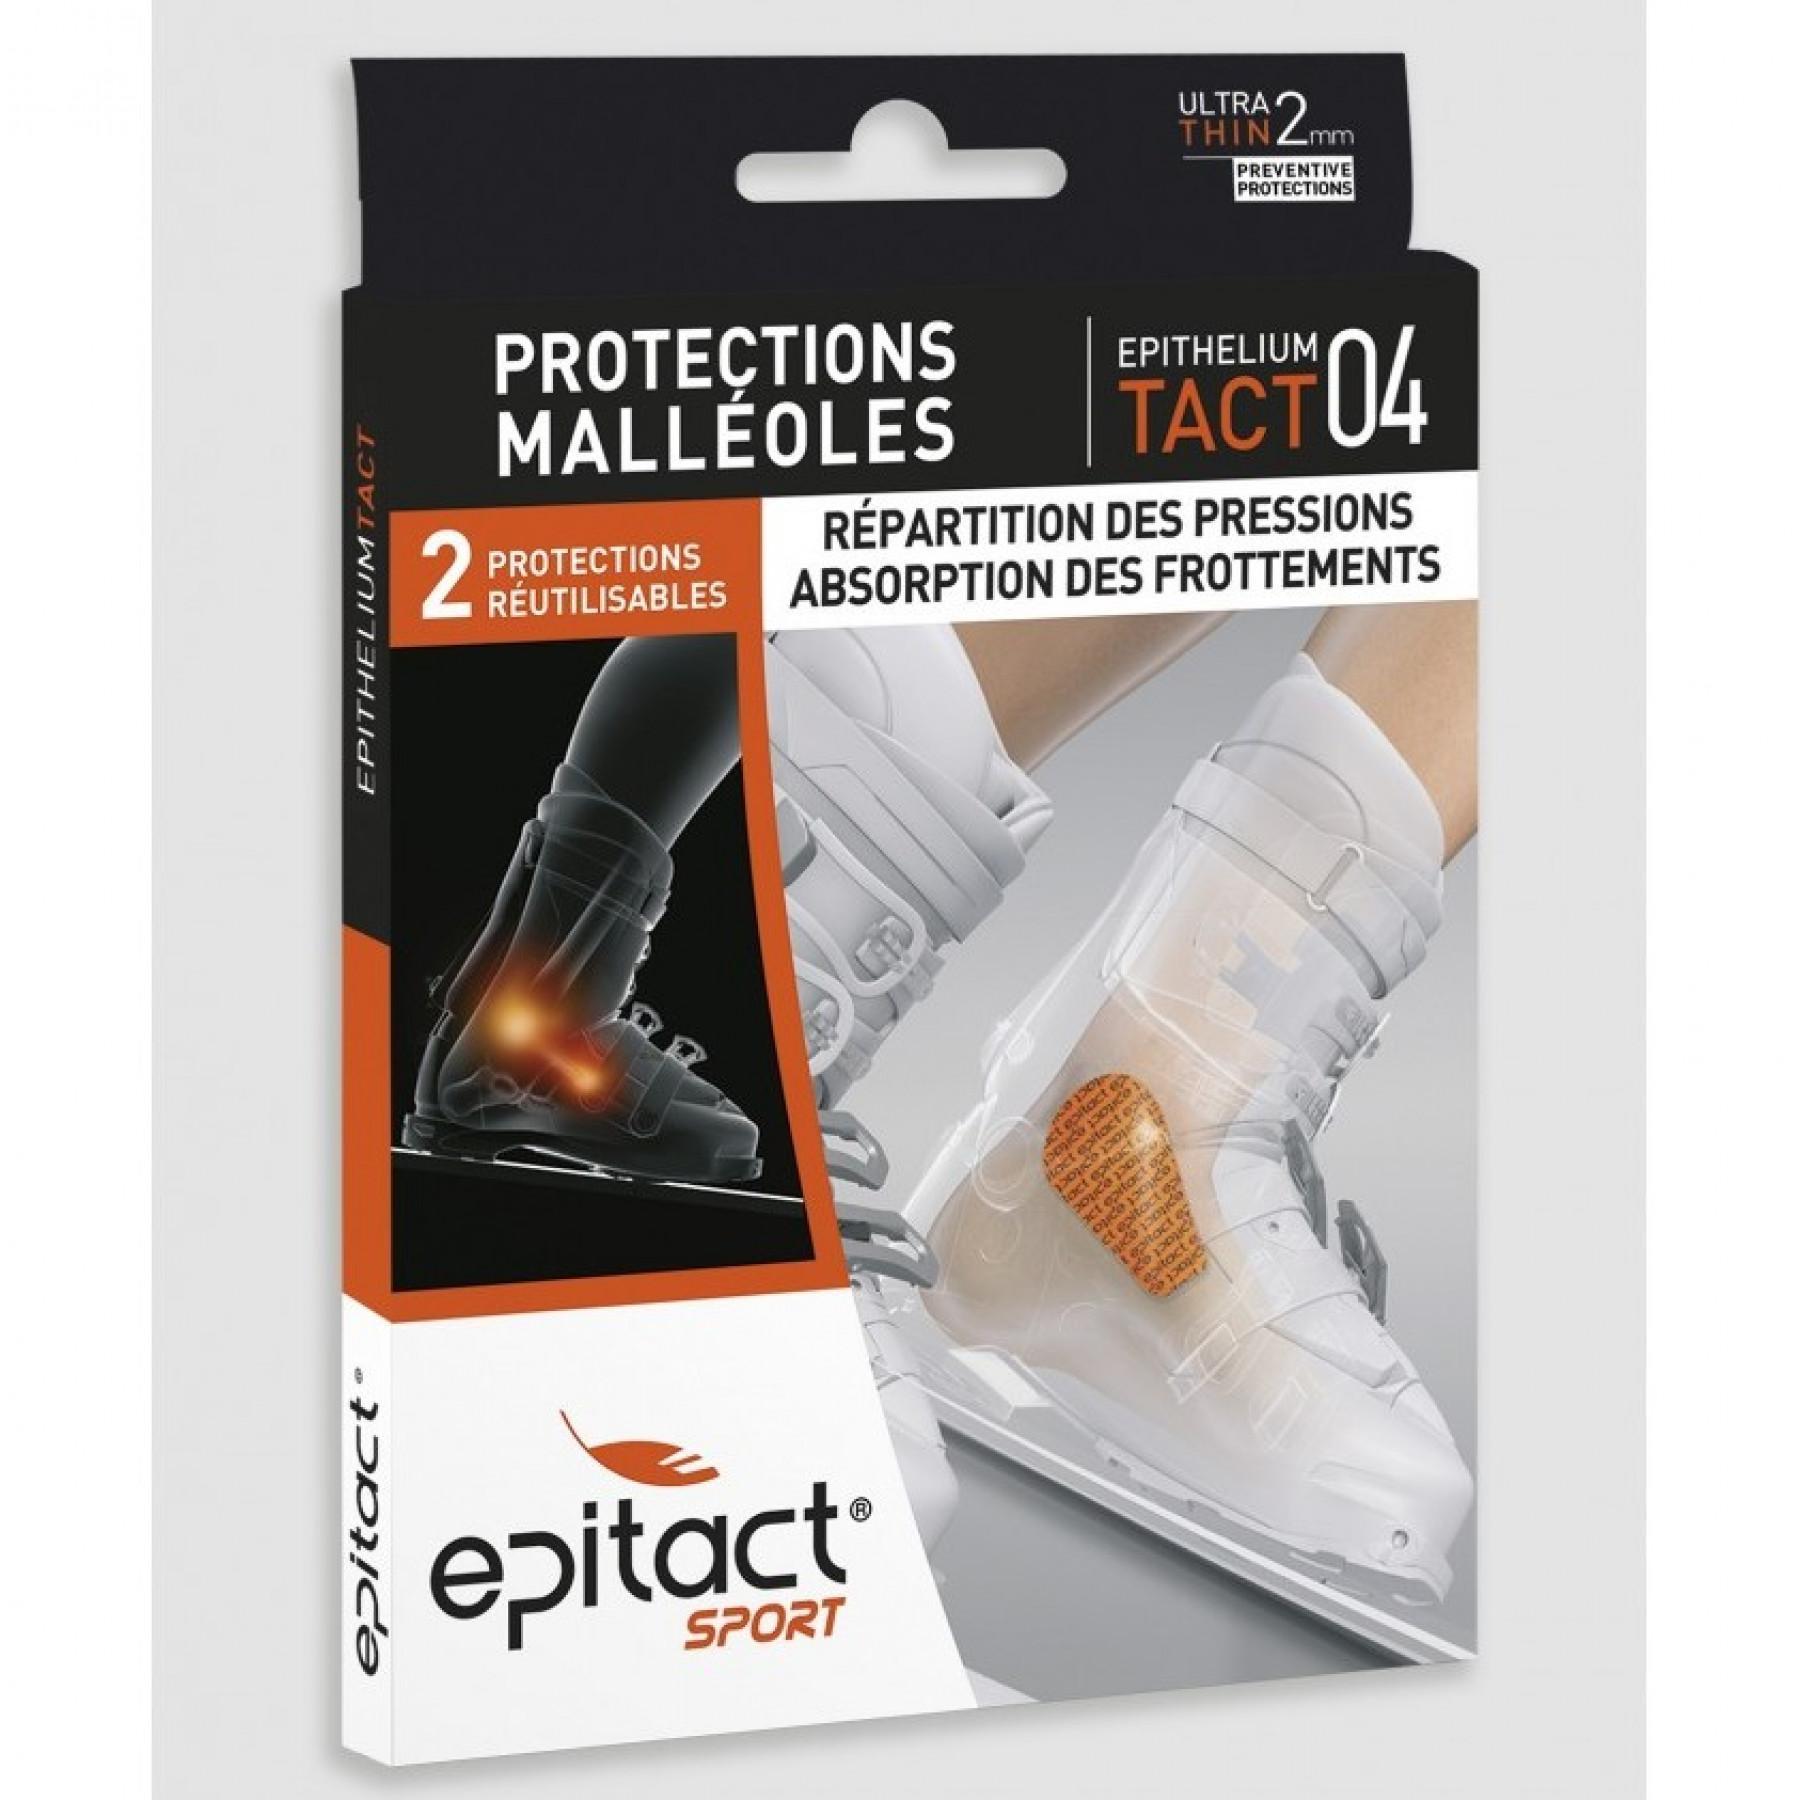 Protections malléoles Epitact EPITHELIUMTACT 04 (lot de 2 protections)